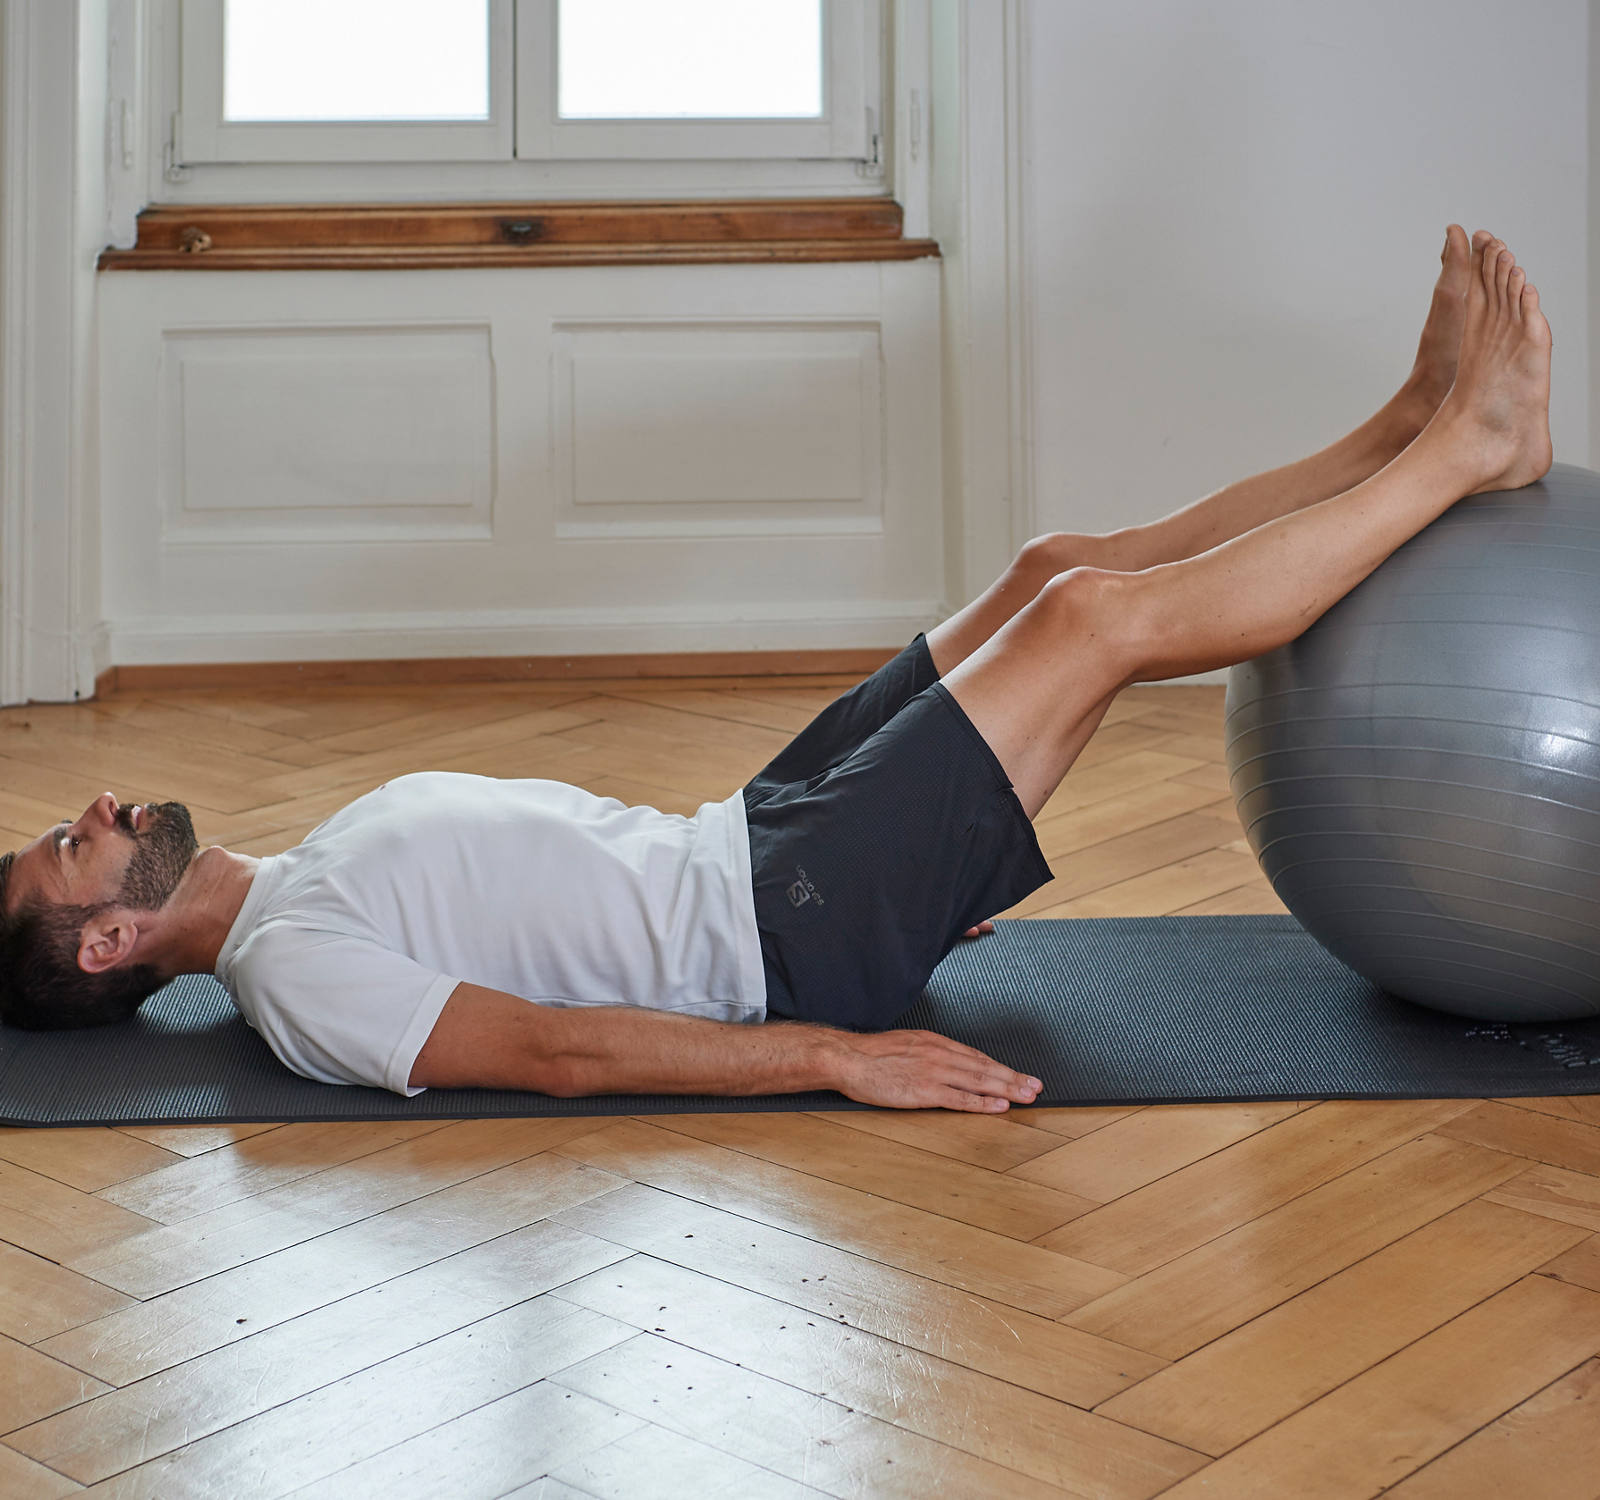 Exercise for acute lumbago and back pain